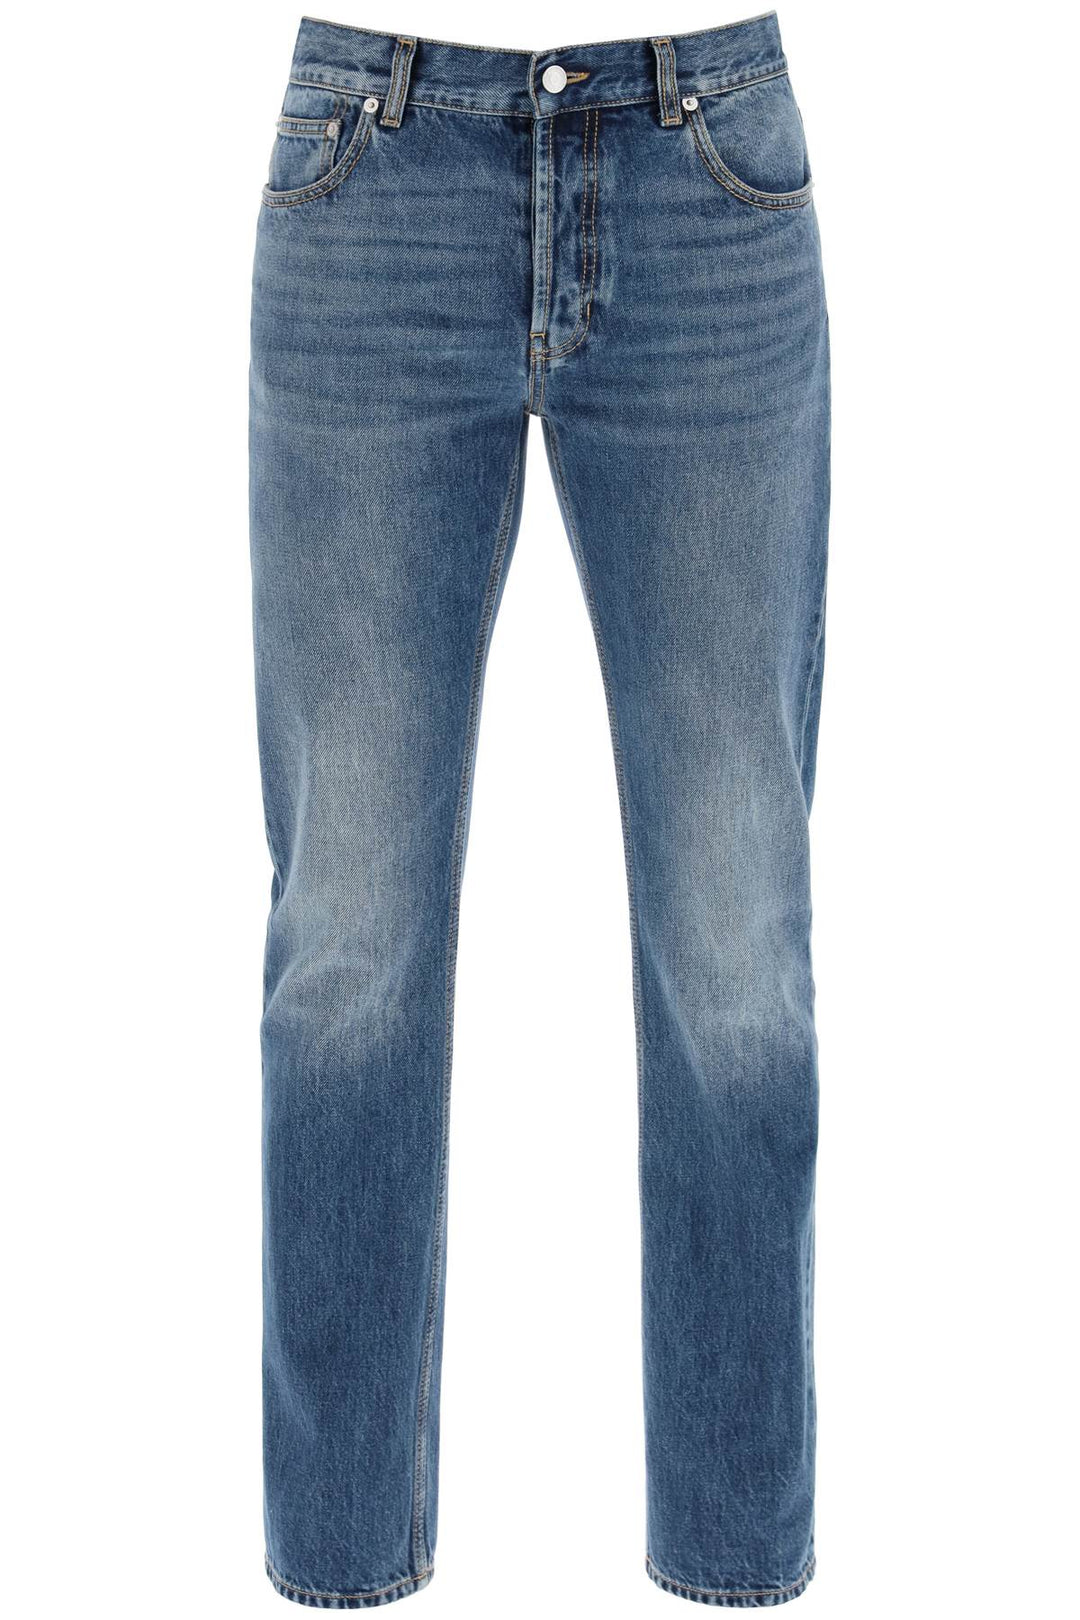 Alexander Mcqueen Straight Leg Jeans With Faux Pocket On The Back.   Blue